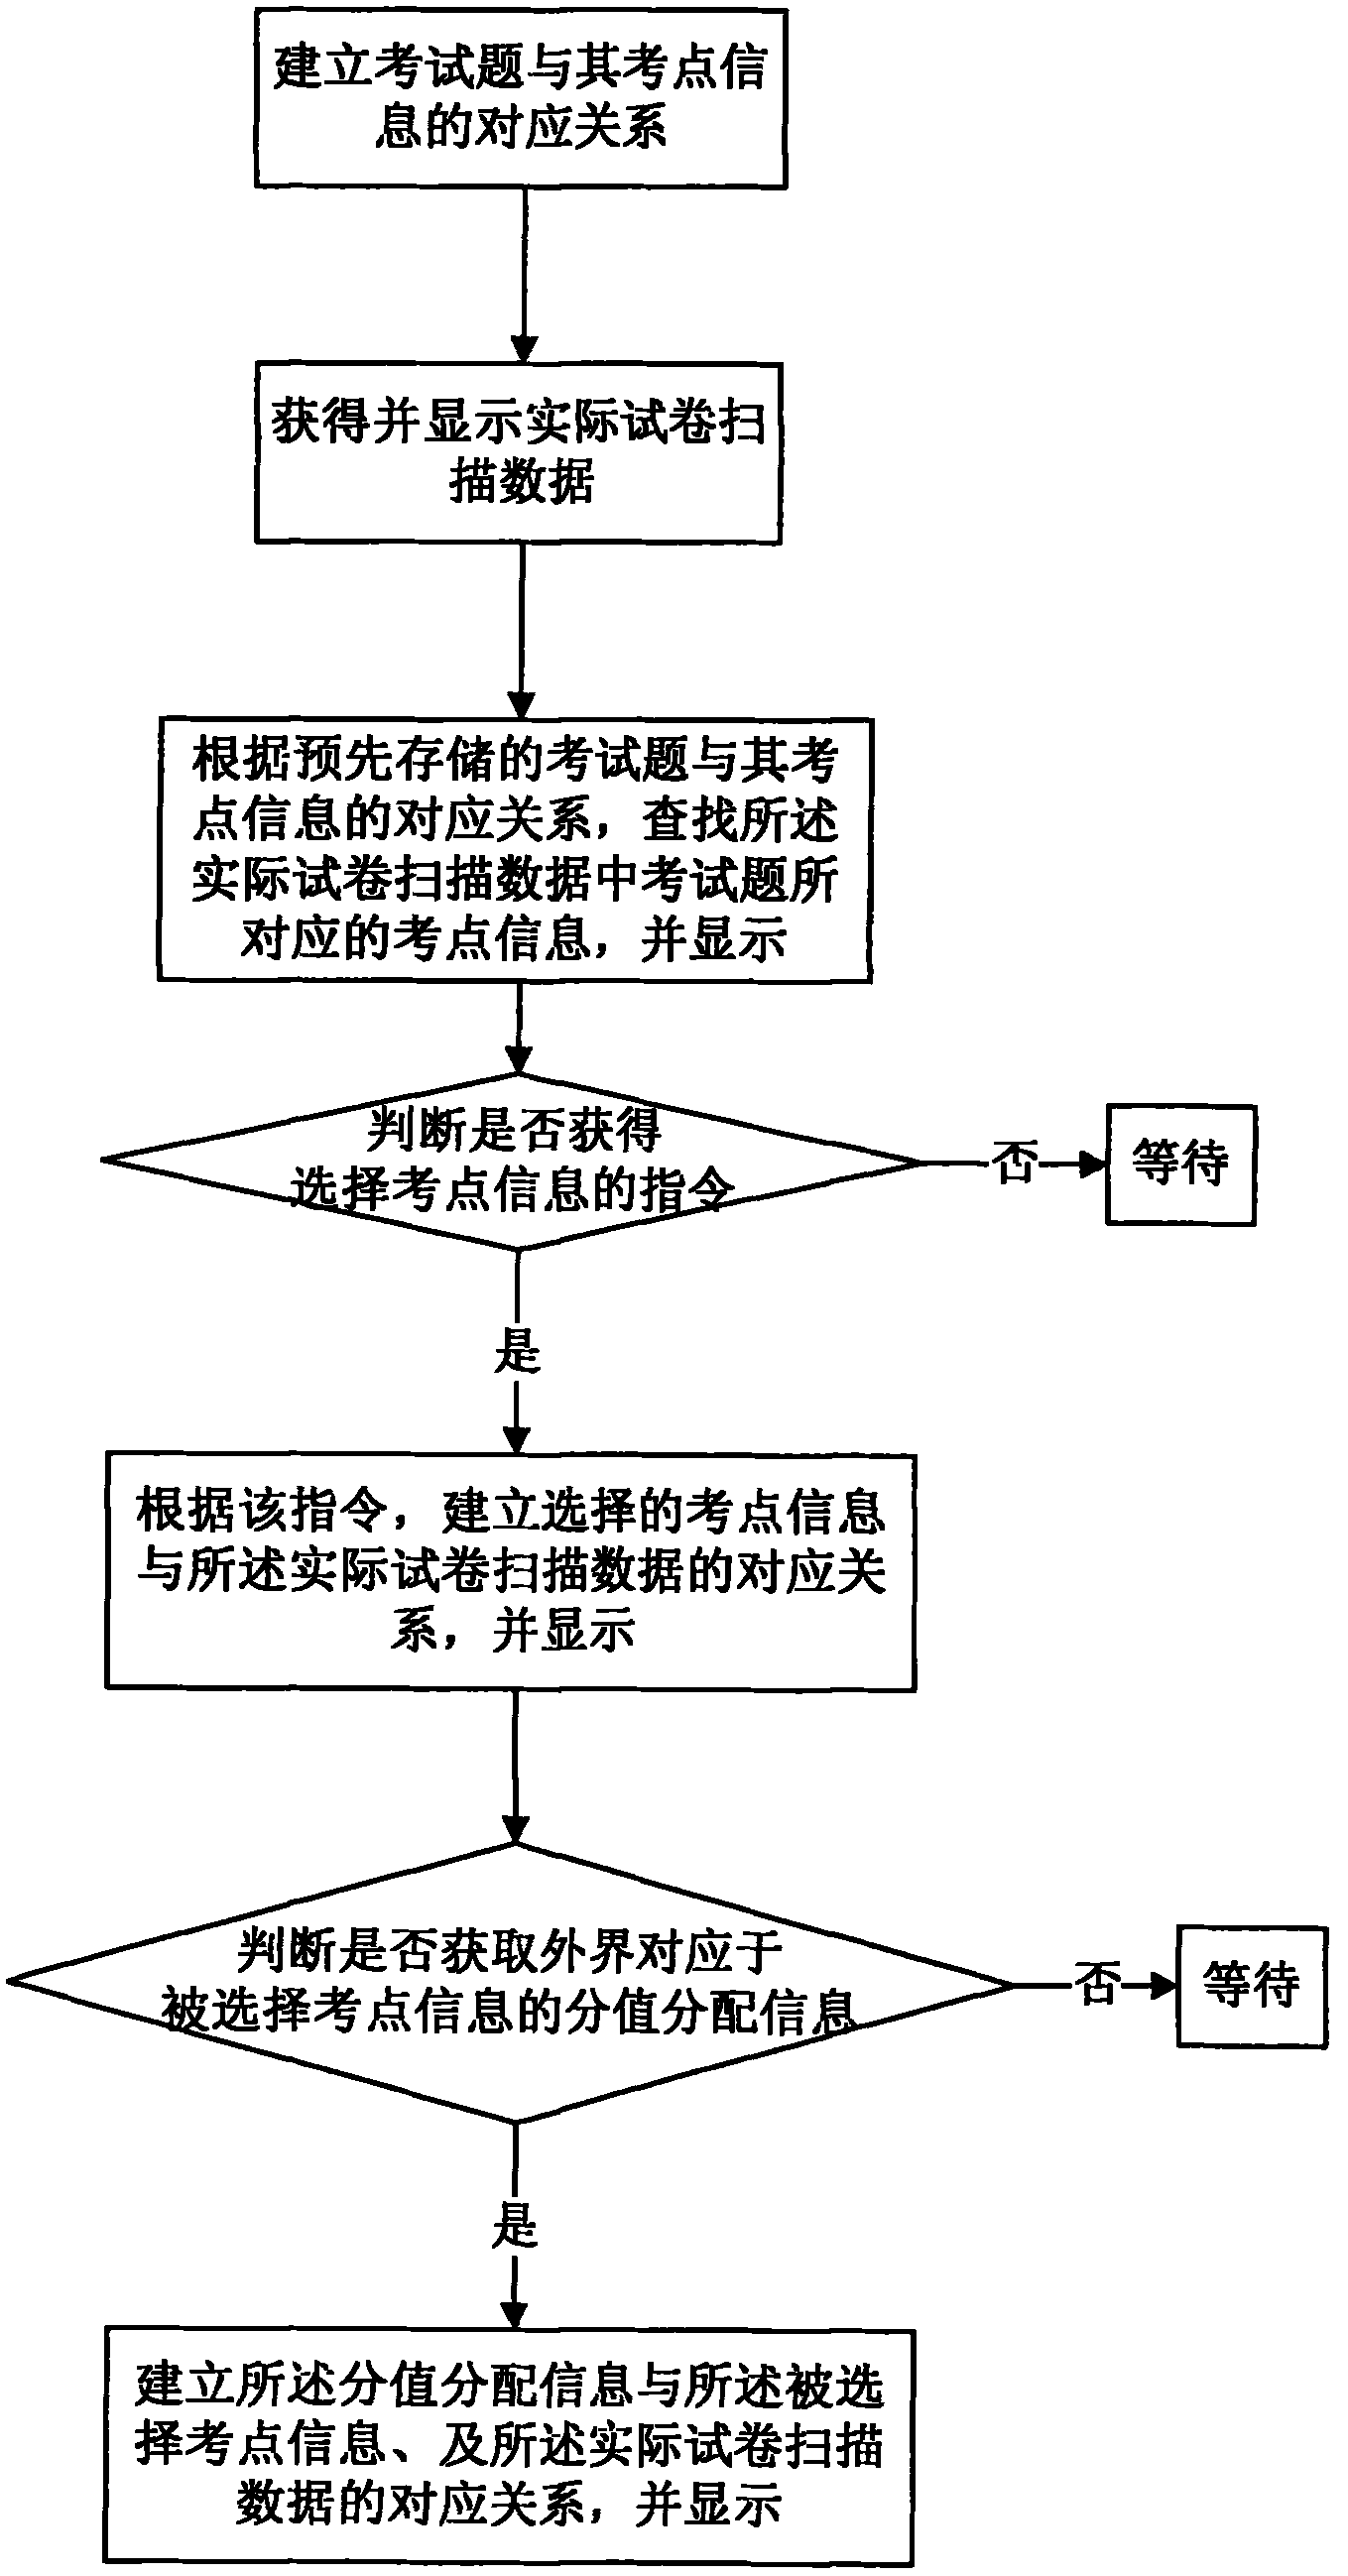 Examination paper reading system and marking implementation method thereof